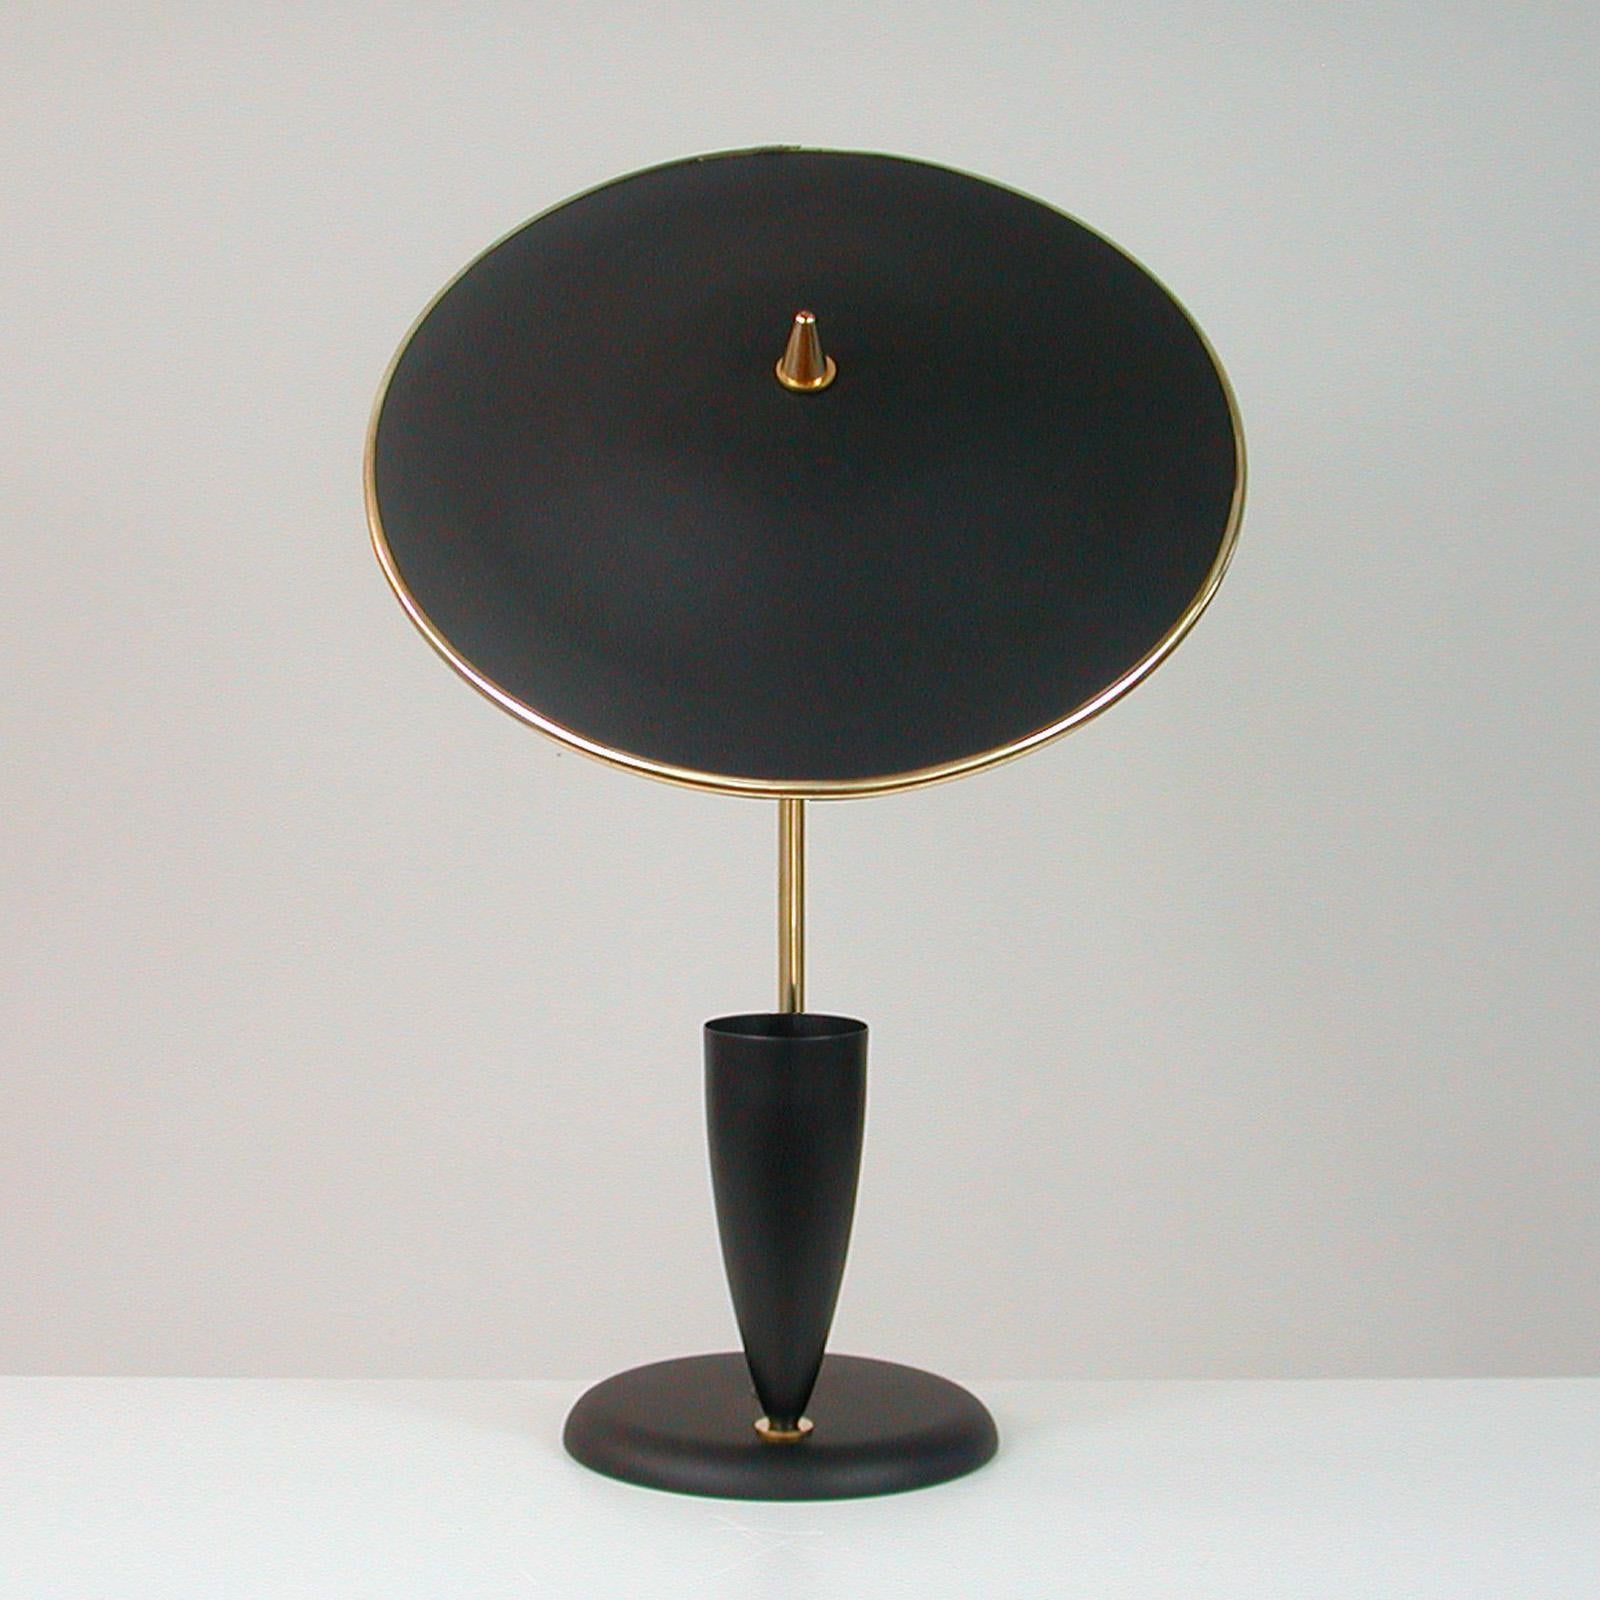 French Midcentury Reflecting Black and Brass Table Lamp, 1950s For Sale 11